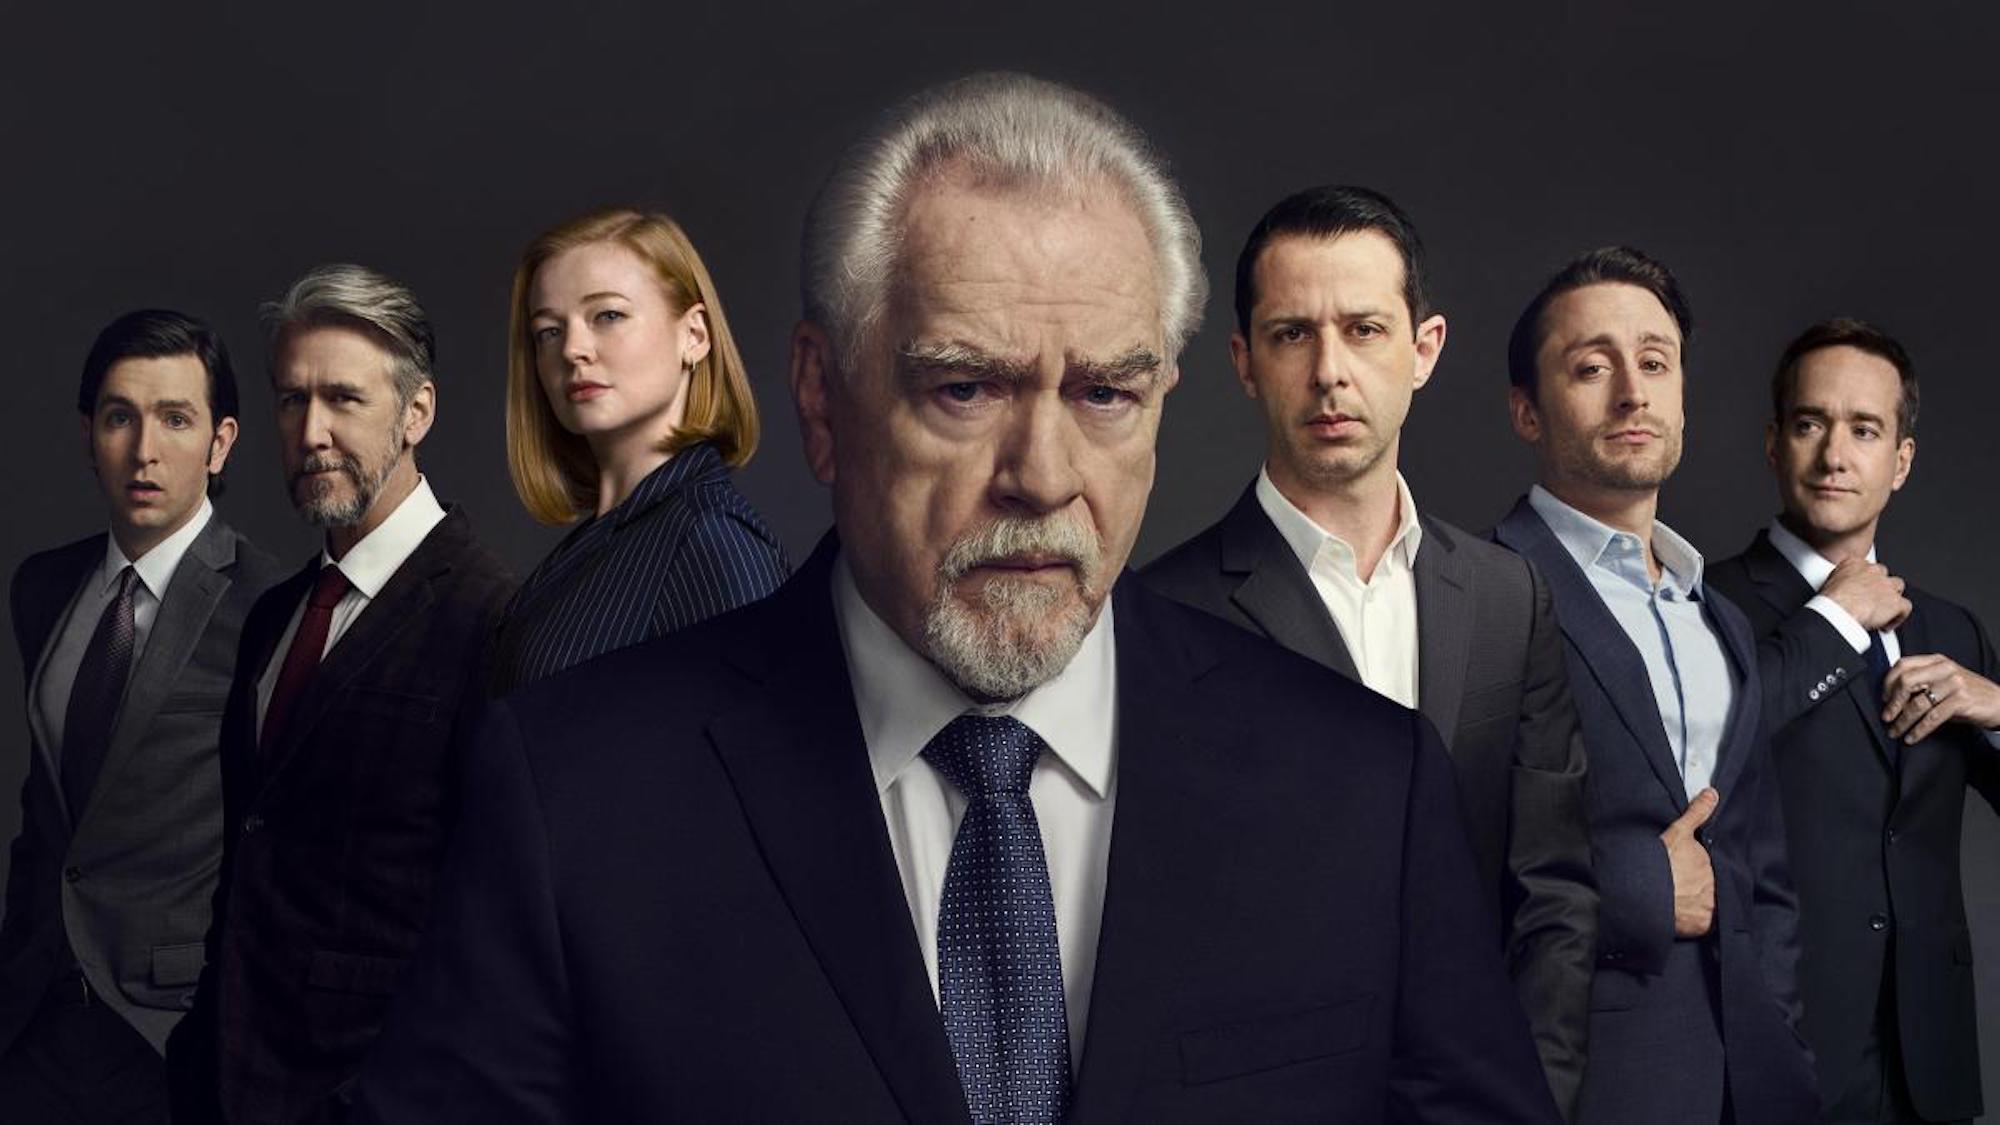 Succession is more than a television series – it is a thought-provoking exploration of the human condition through the prism of power. Look at season 4!